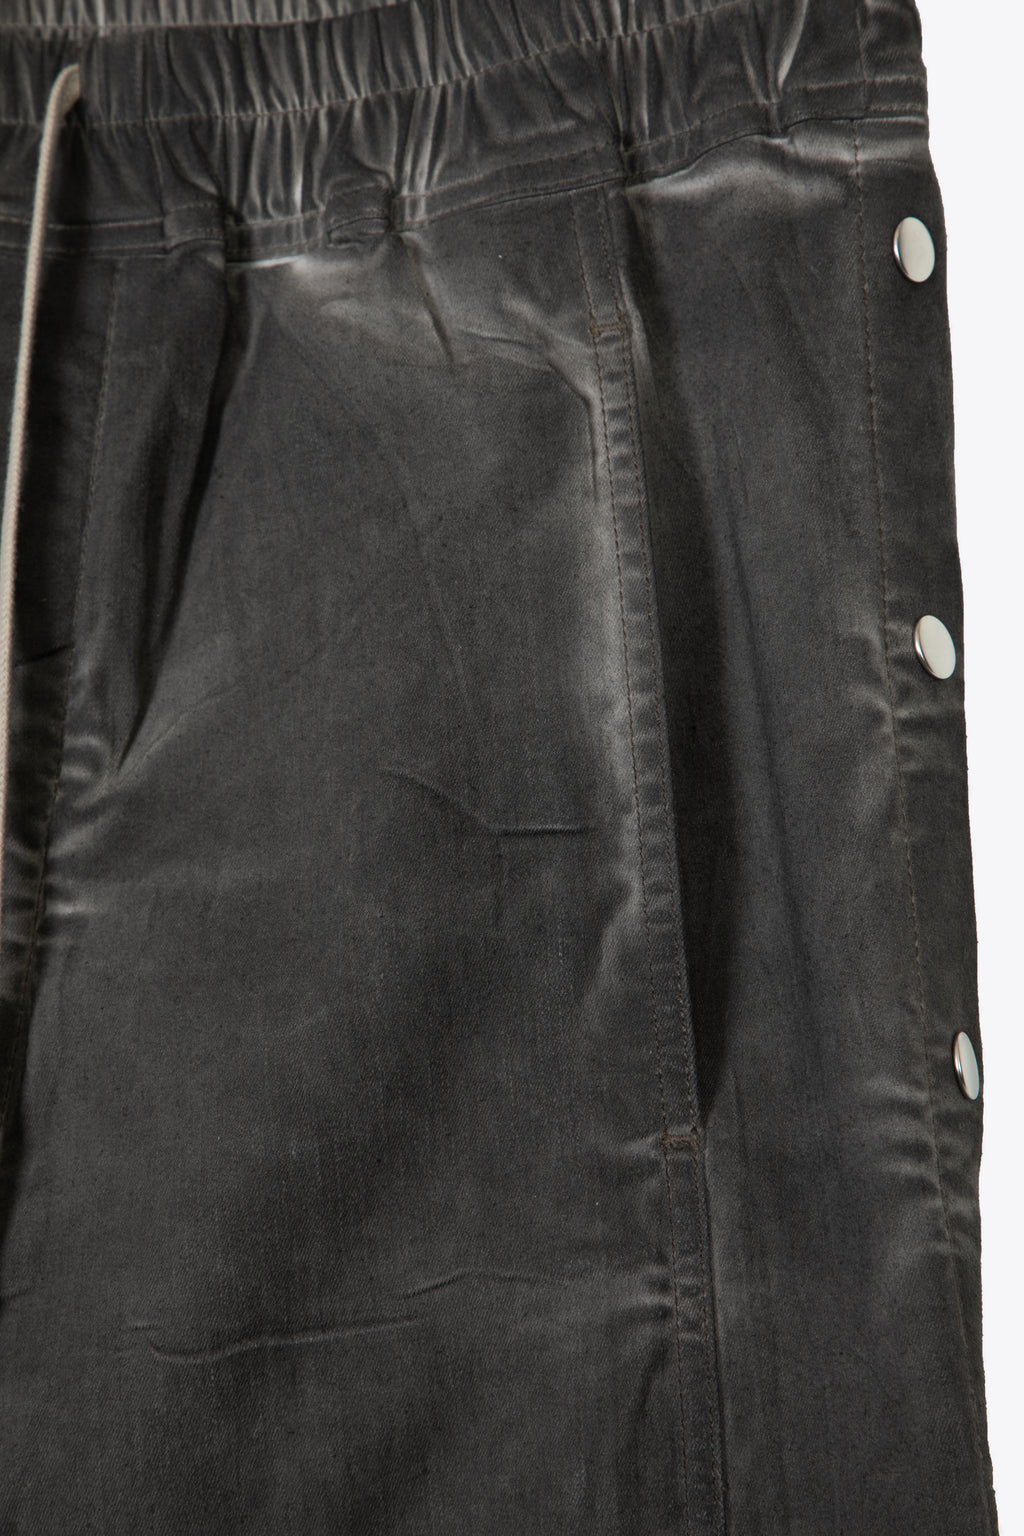 alt-image__Dark-grey-waxed-cotton-pants-with-side-snaps---Pusher-Pants